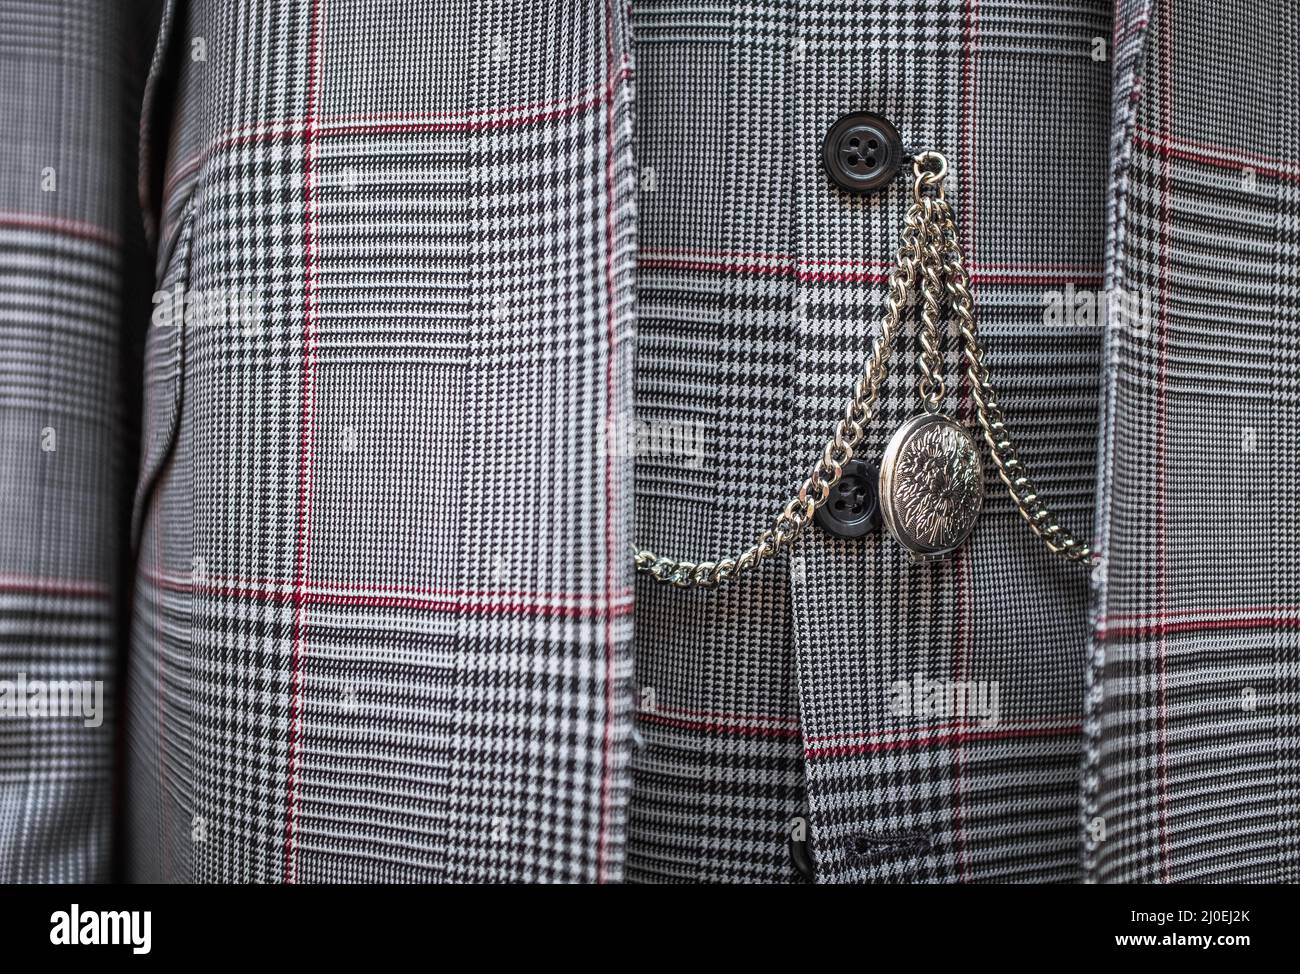 Pocket Watch And Suit Detail Stock Photo